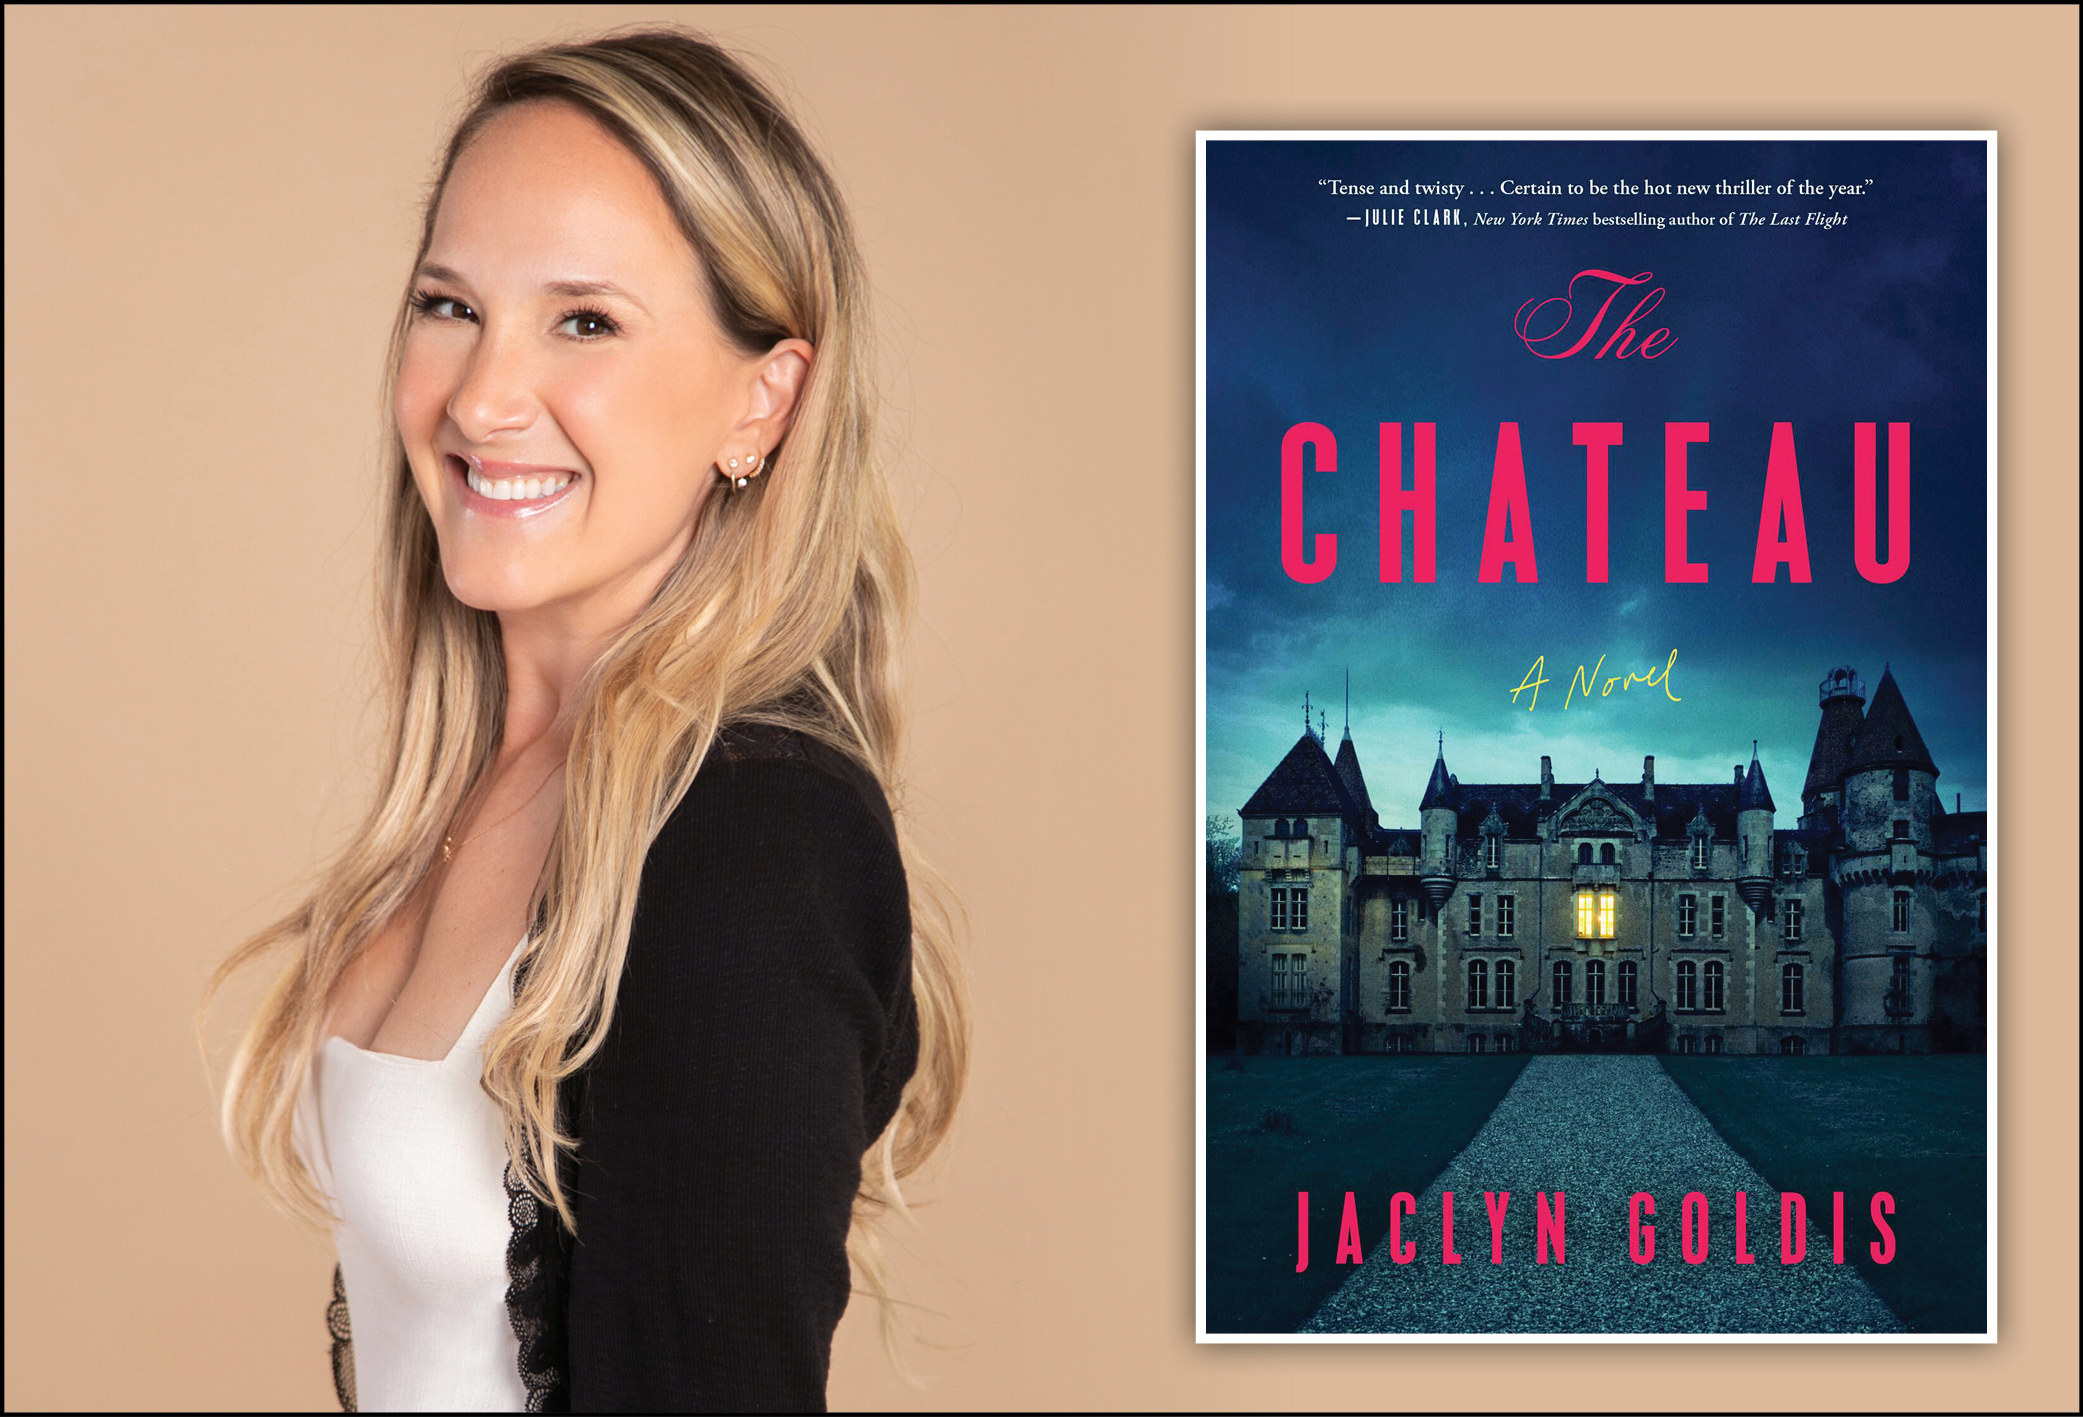 Tuesday, May 28 The Chateau by Jaclyn Goldis